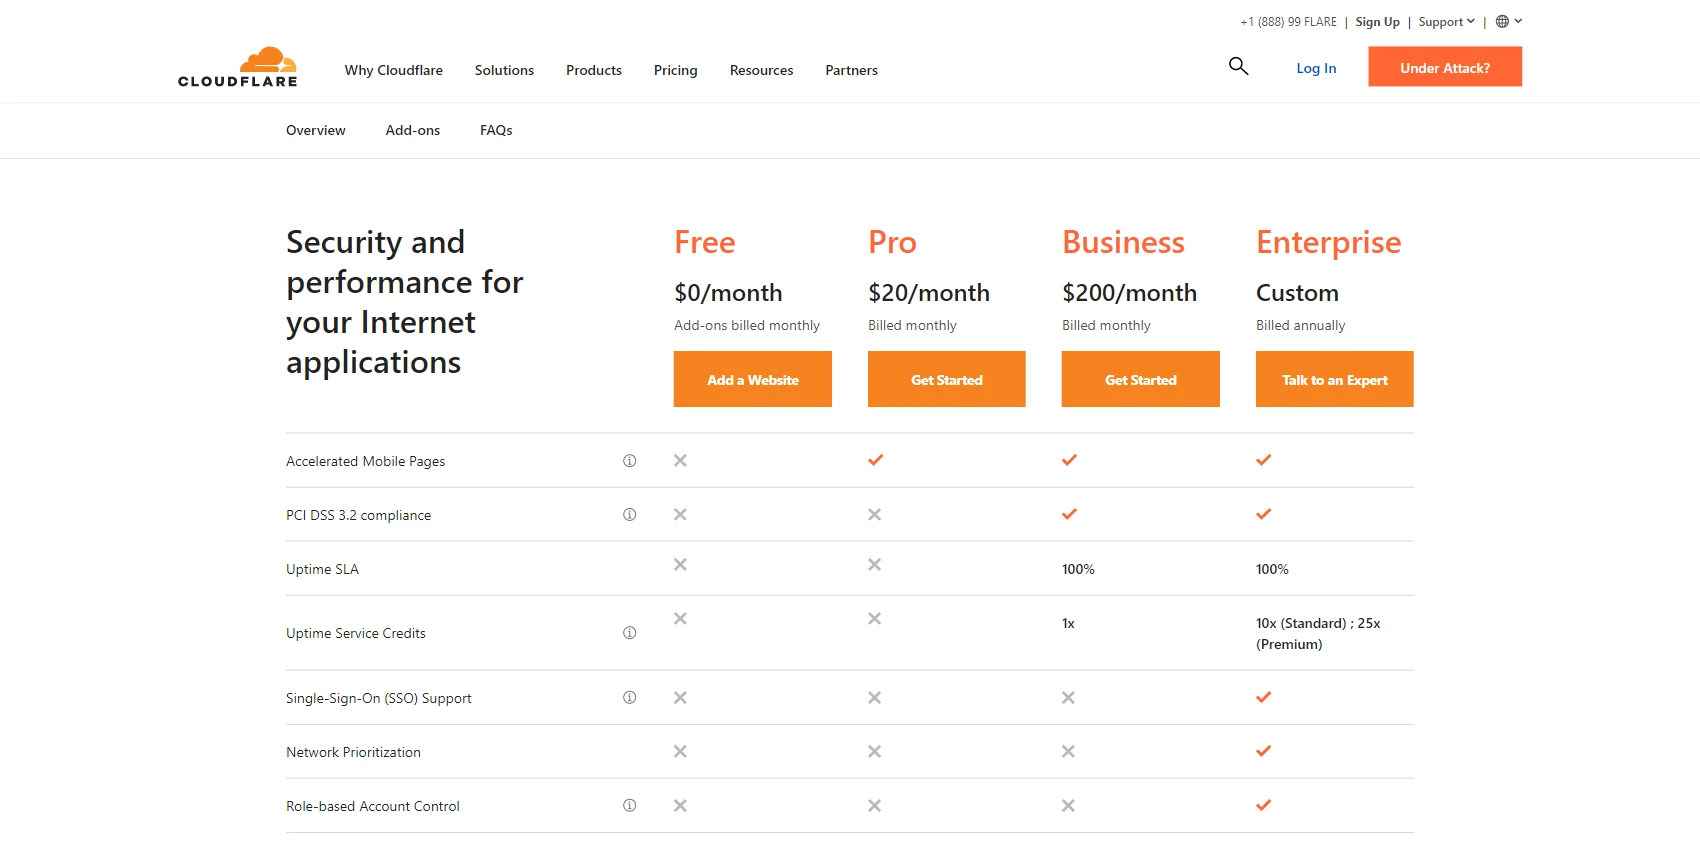 2. Cloudflare Pricing